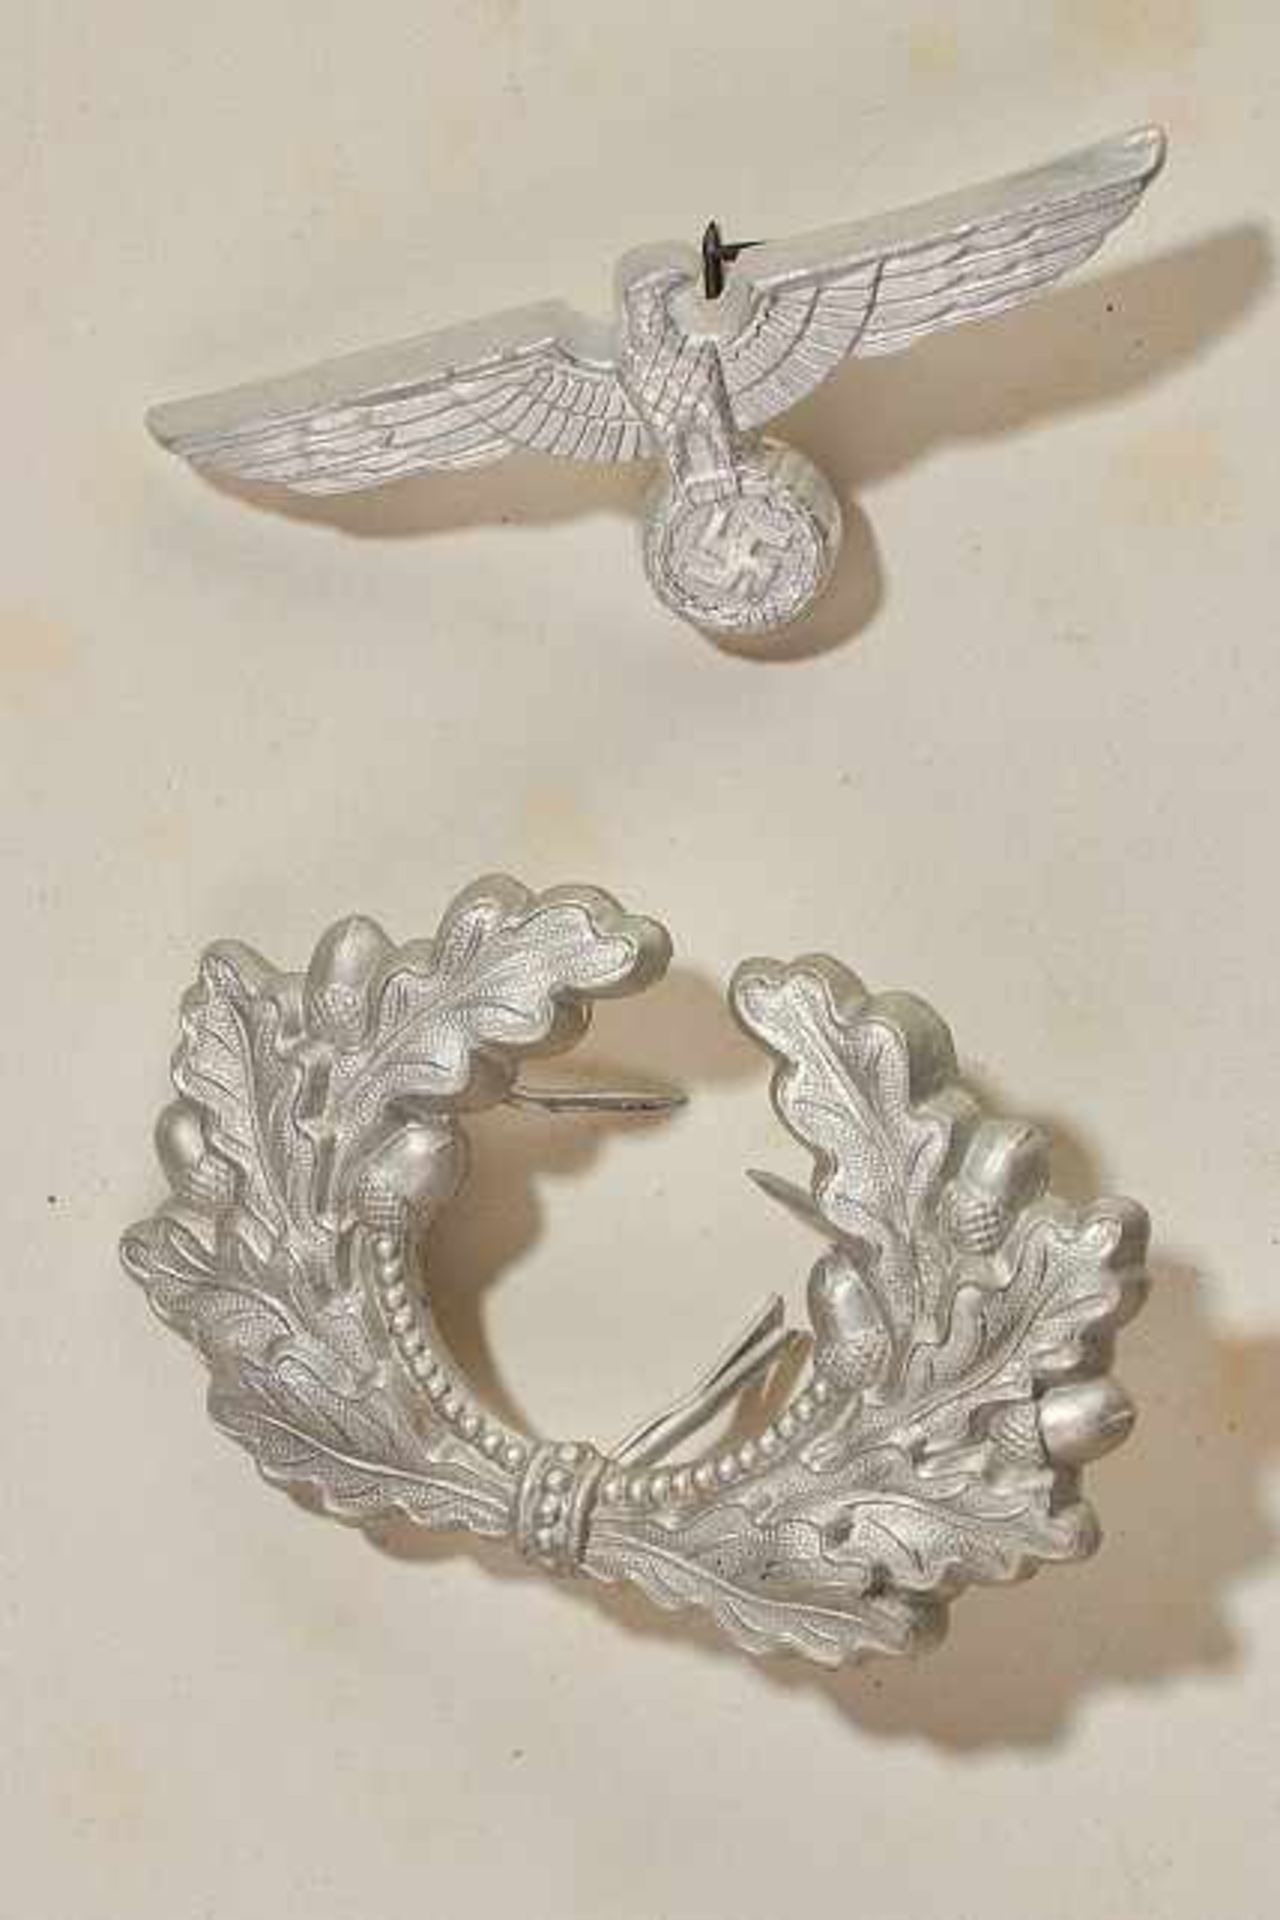 Deutsches Reich 1933 - 1945 - Heer - Uniformen : Army Officers Visor Insignia.Lot consists of an